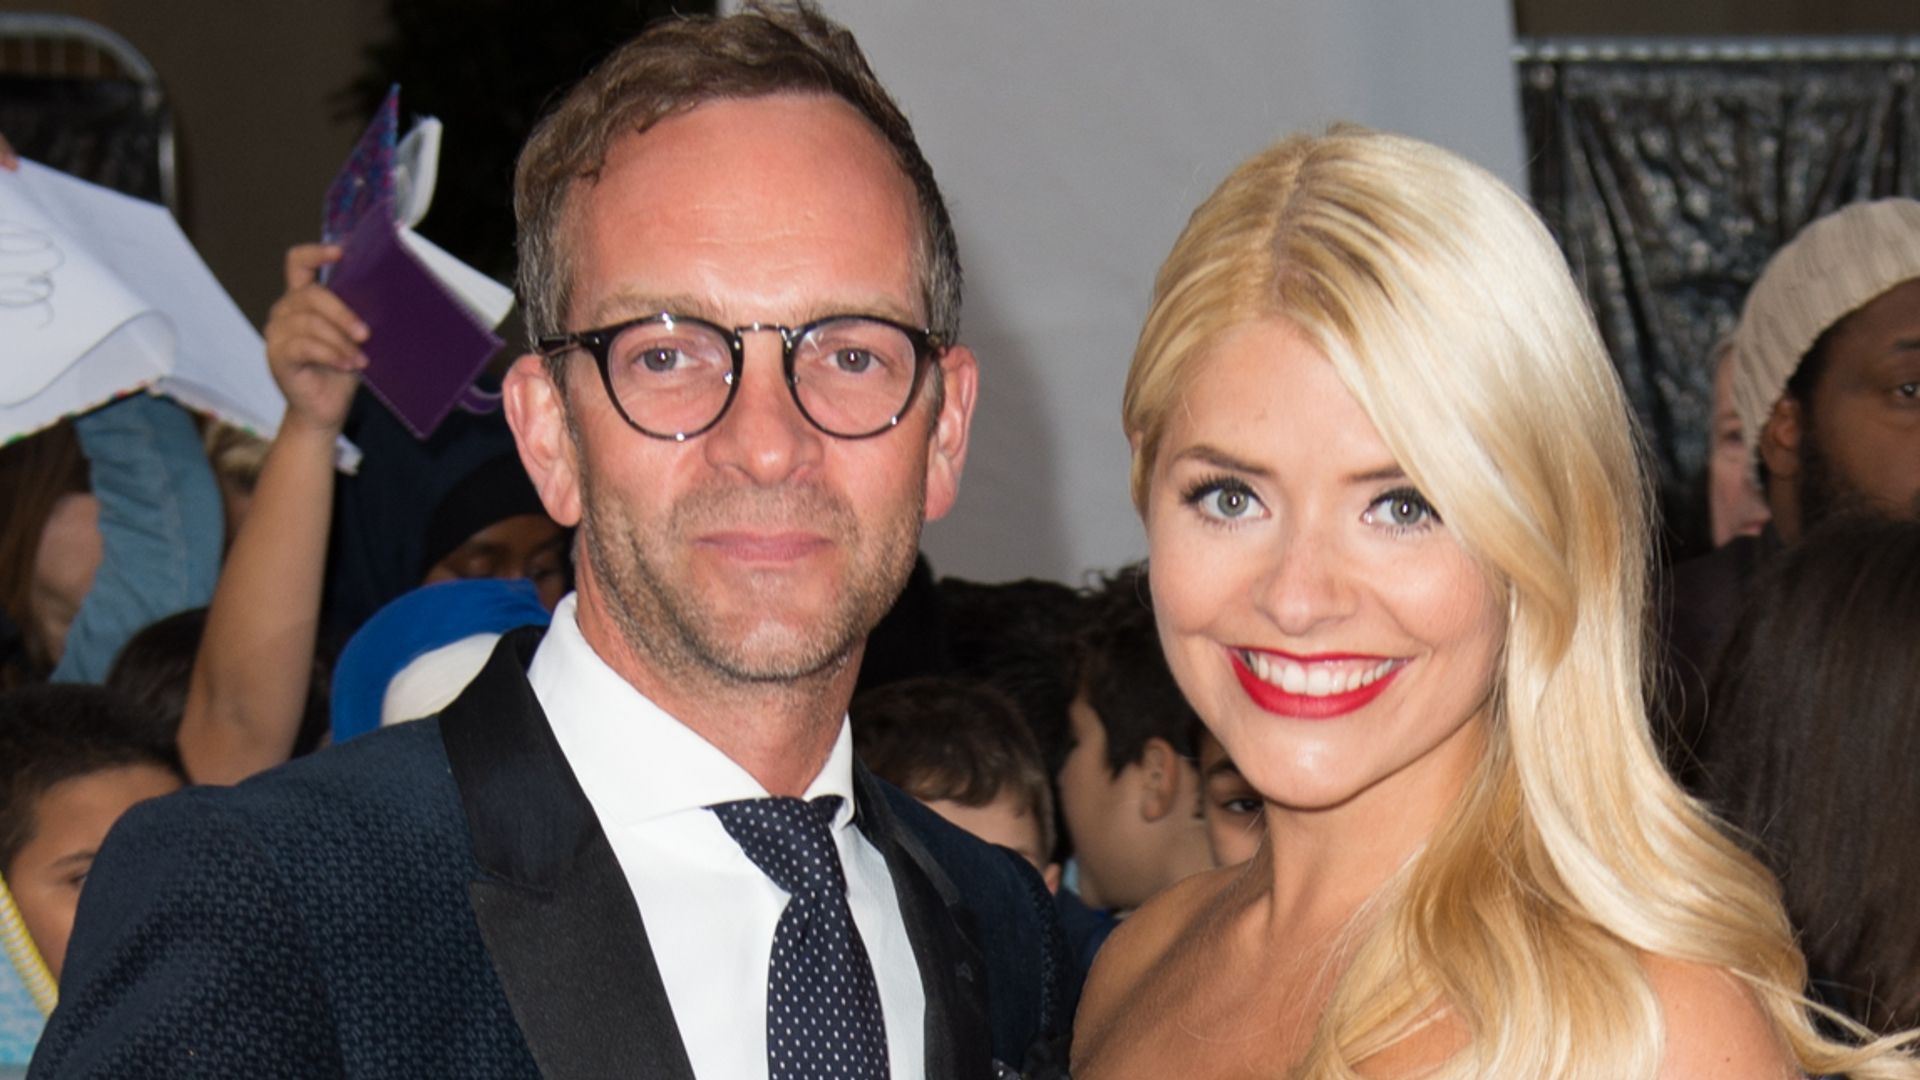 Dan Baldwin with arm around Holly Willoughby